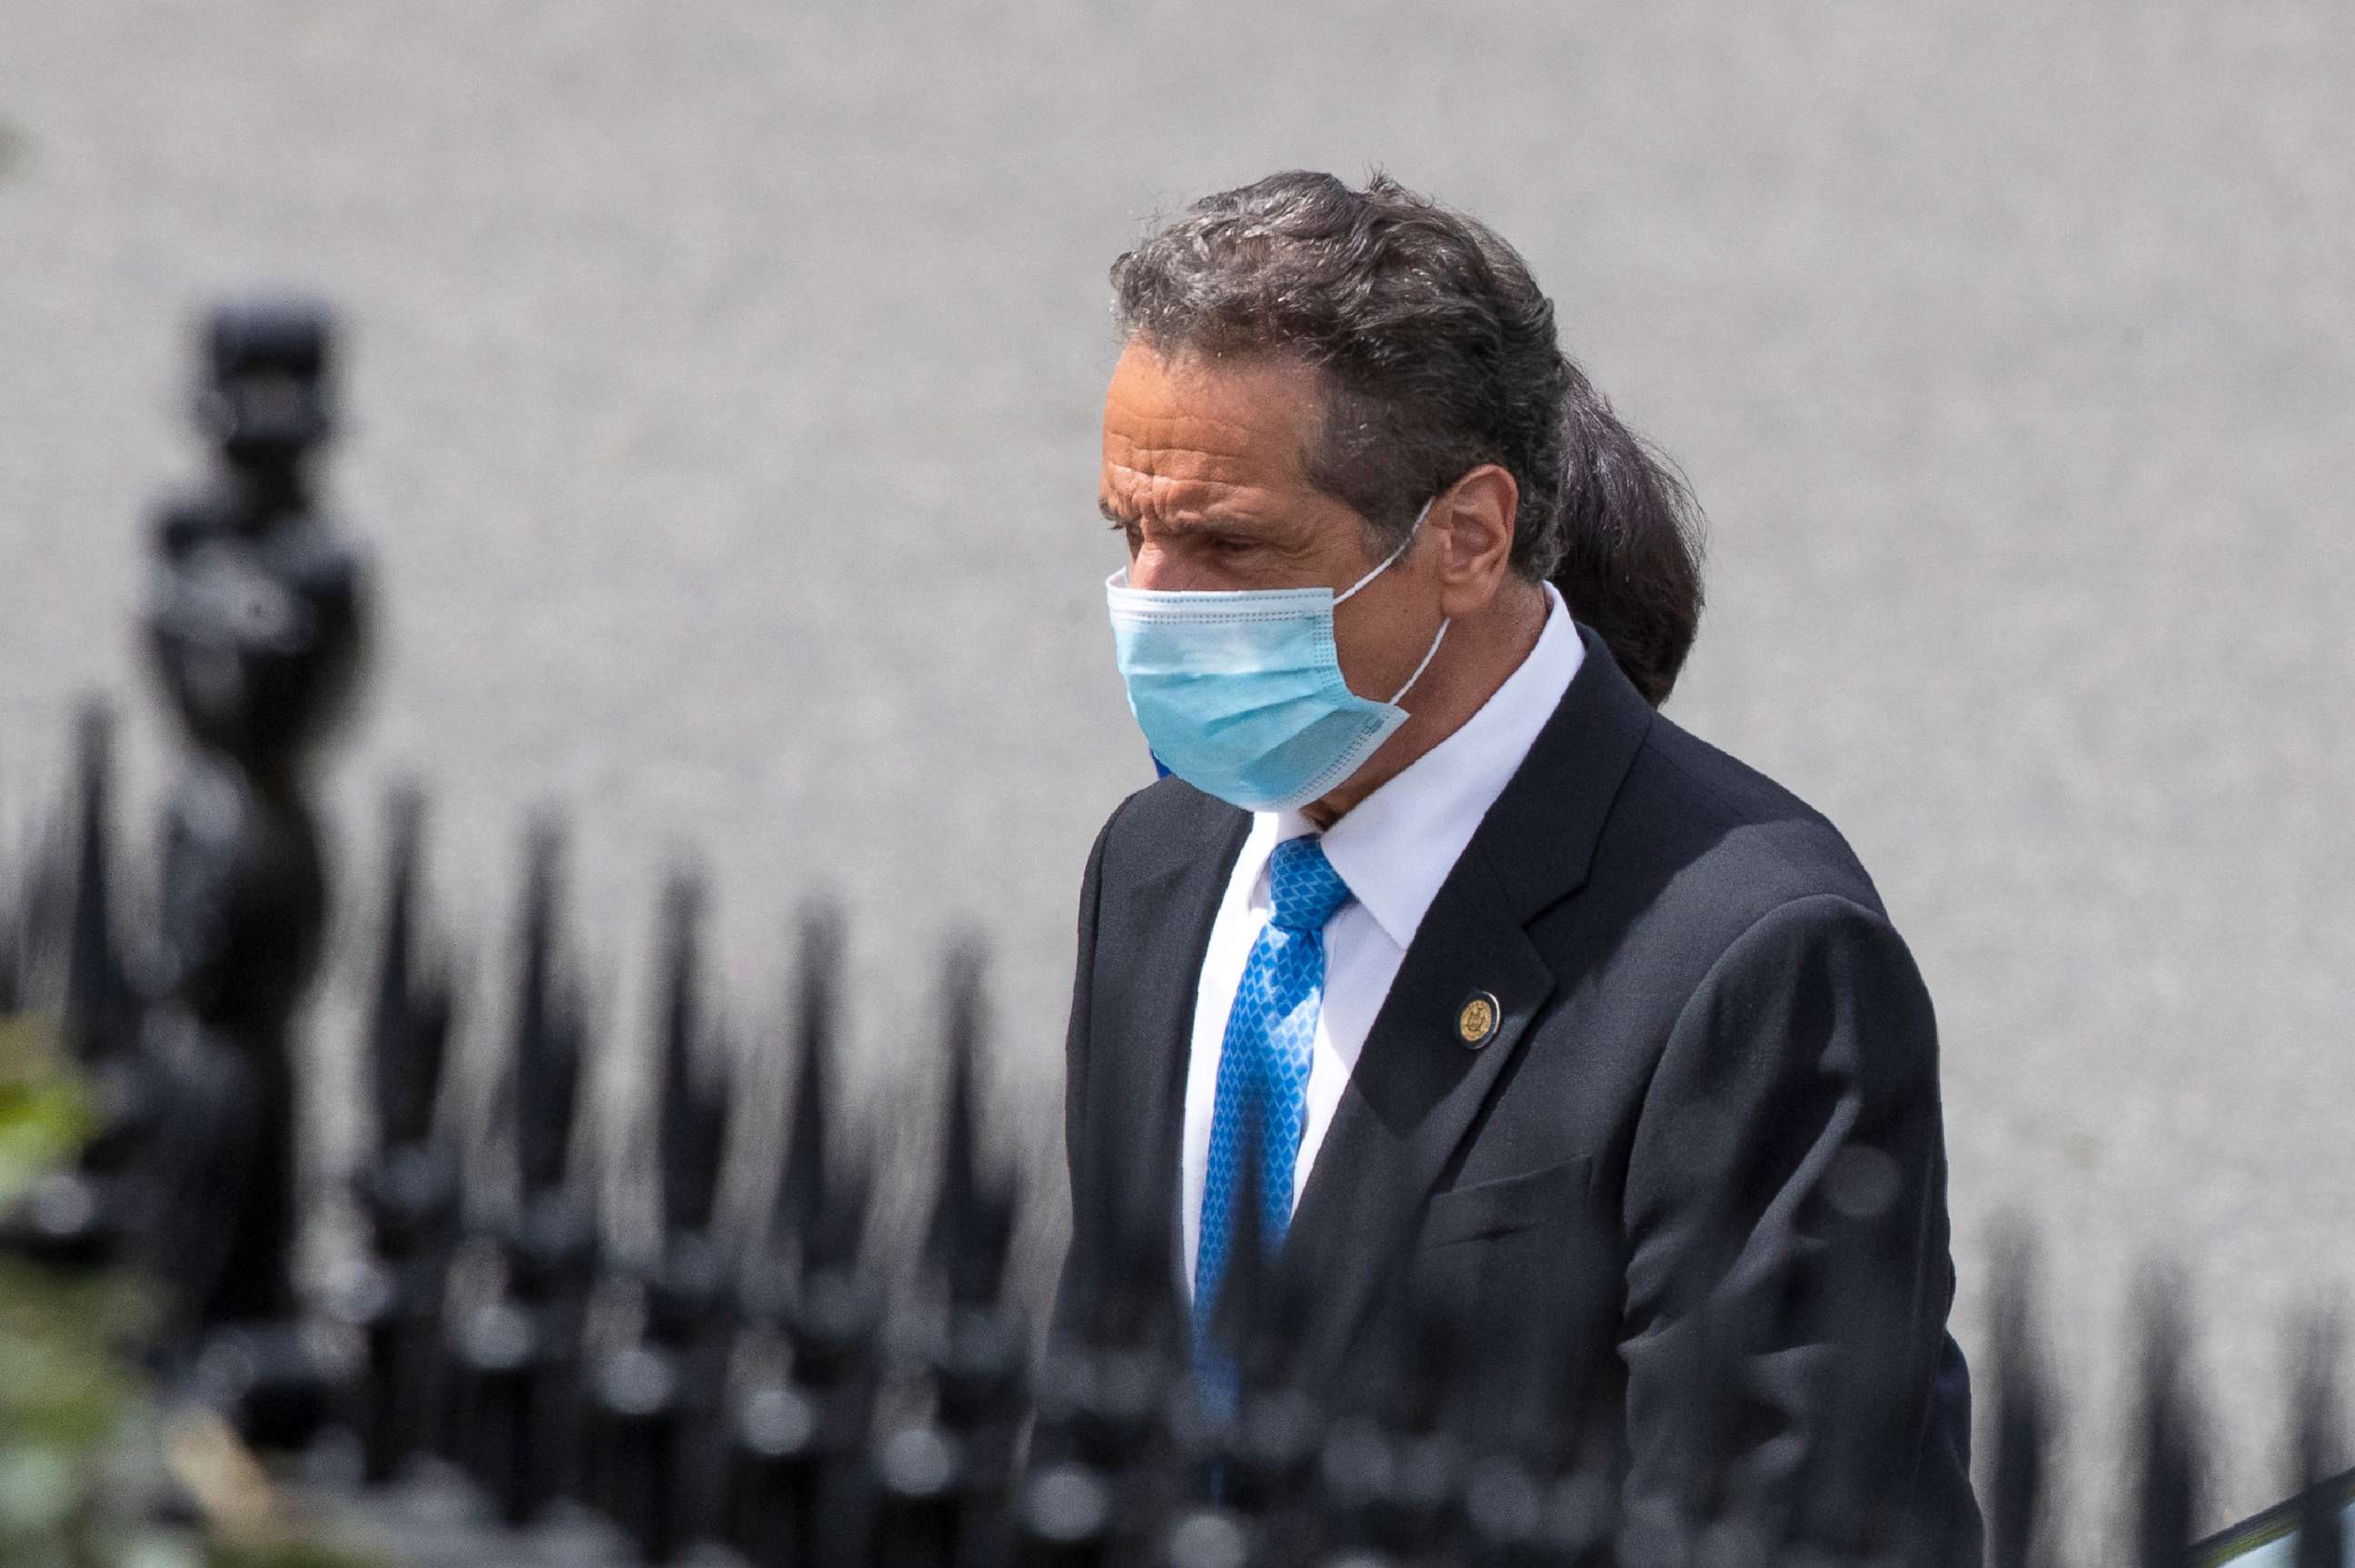 PHOTO: New York Gov. Andrew Cuomo walks towards the West Wing as he arrives at the White House for a meeting with President Donald Trump, May 27, 2020.